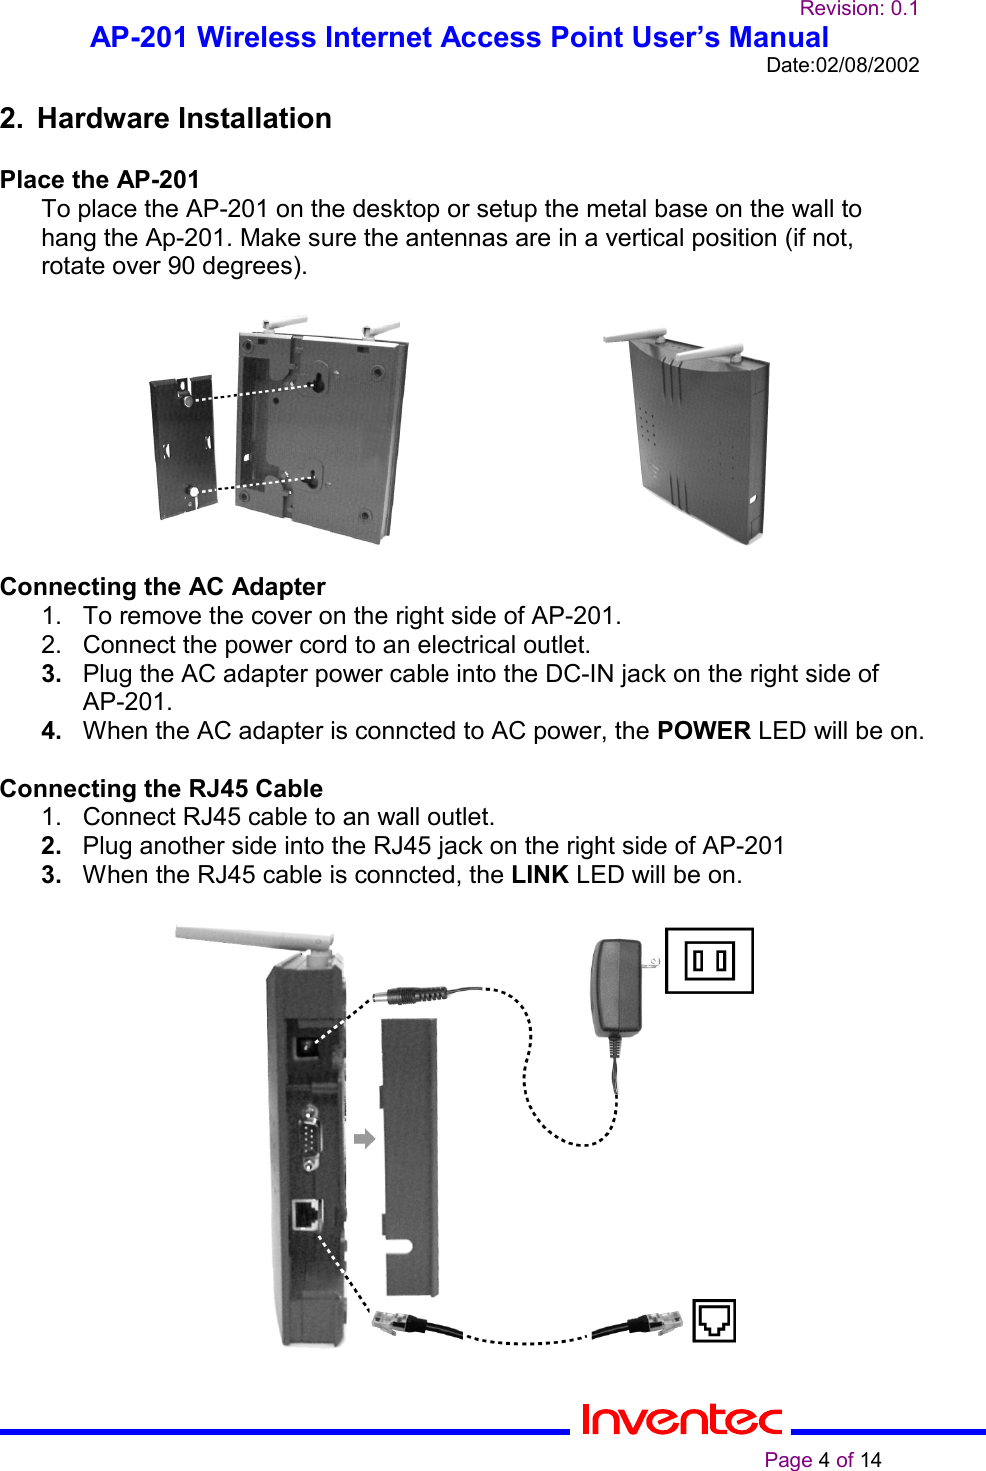 Revision: 0.1AP-201 Wireless Internet Access Point User’s ManualDate:02/08/2002                                                                                                                                                    Page 4 of 142. Hardware InstallationPlace the AP-201To place the AP-201 on the desktop or setup the metal base on the wall tohang the Ap-201. Make sure the antennas are in a vertical position (if not,rotate over 90 degrees).                          Connecting the AC Adapter21.  To remove the cover on the right side of AP-201.2.  Connect the power cord to an electrical outlet.3.  Plug the AC adapter power cable into the DC-IN jack on the right side ofAP-201.4.  When the AC adapter is conncted to AC power, the POWER LED will be on.Connecting the RJ45 Cable1.  Connect RJ45 cable to an wall outlet.2.  Plug another side into the RJ45 jack on the right side of AP-2013.  When the RJ45 cable is conncted, the LINK LED will be on.